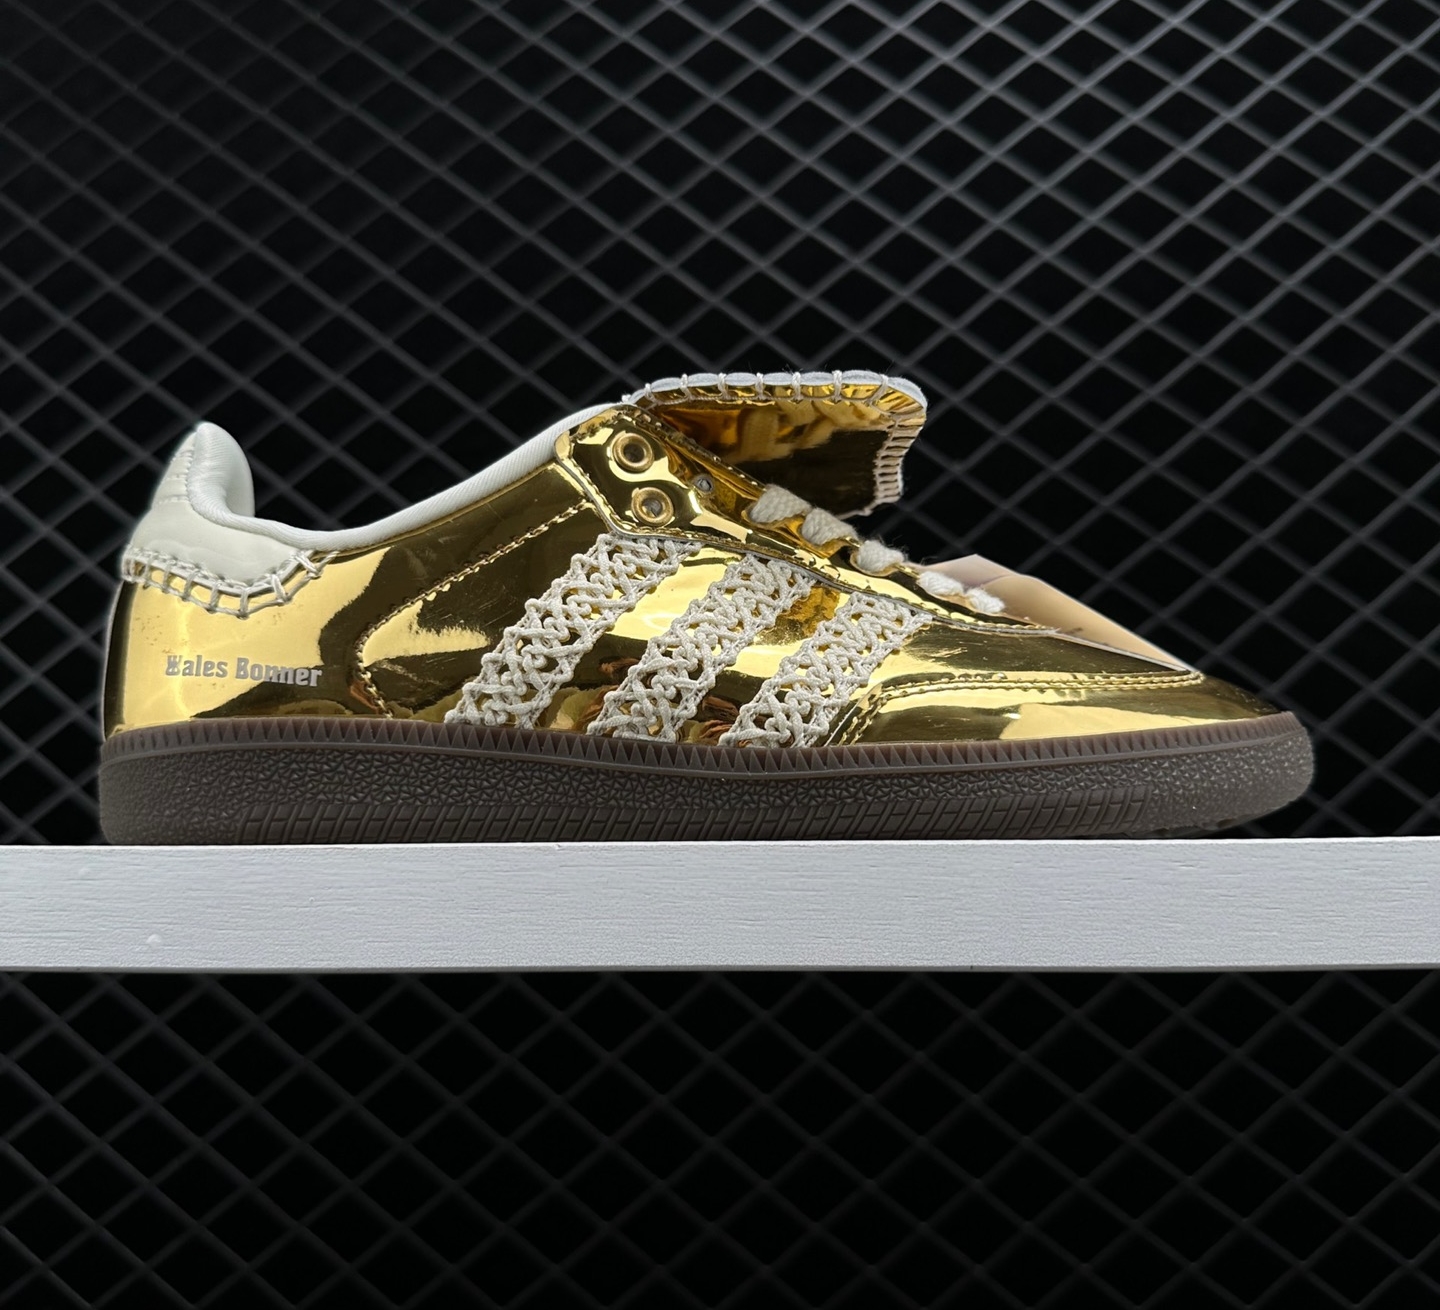 Adidas Samba Wales Bonner Gold | Premium Sneakers for Style and Comfort